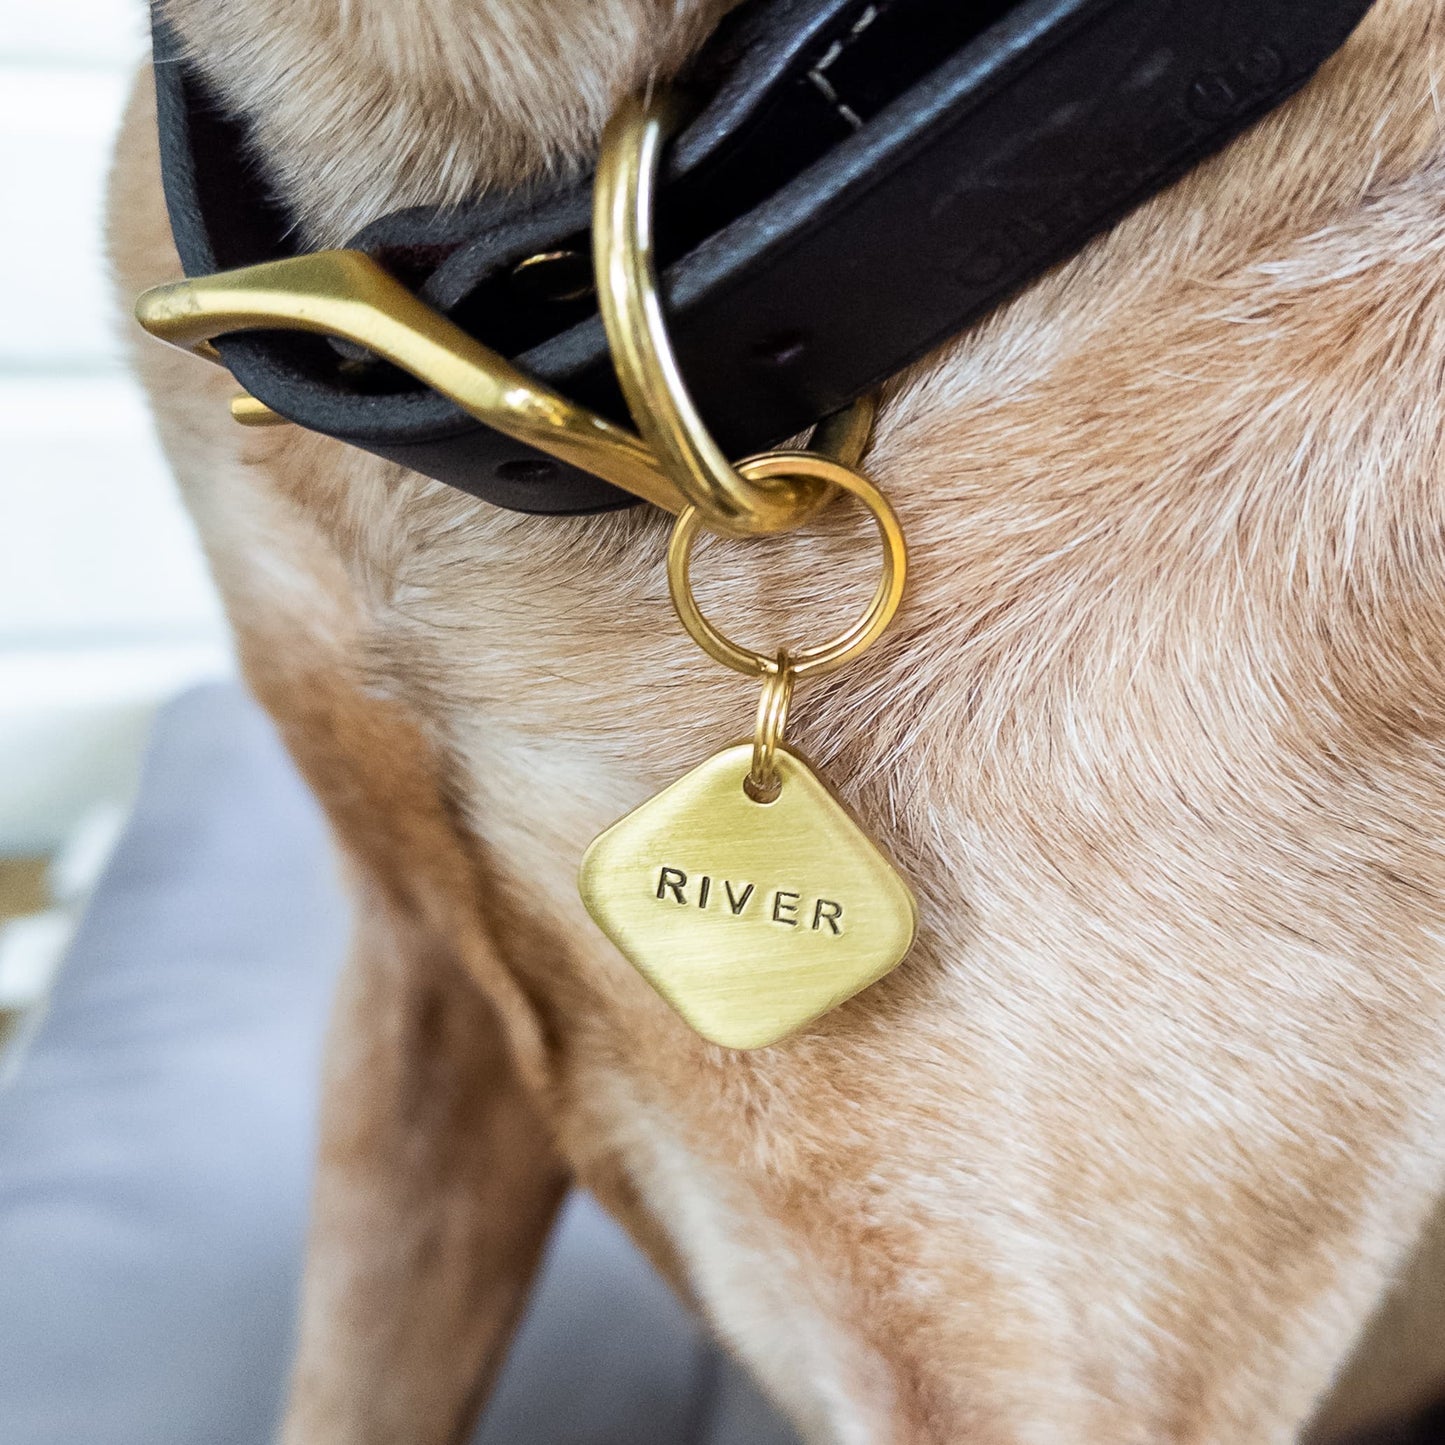 Diamond shaped dog tag on dogs collar with brass hardware.